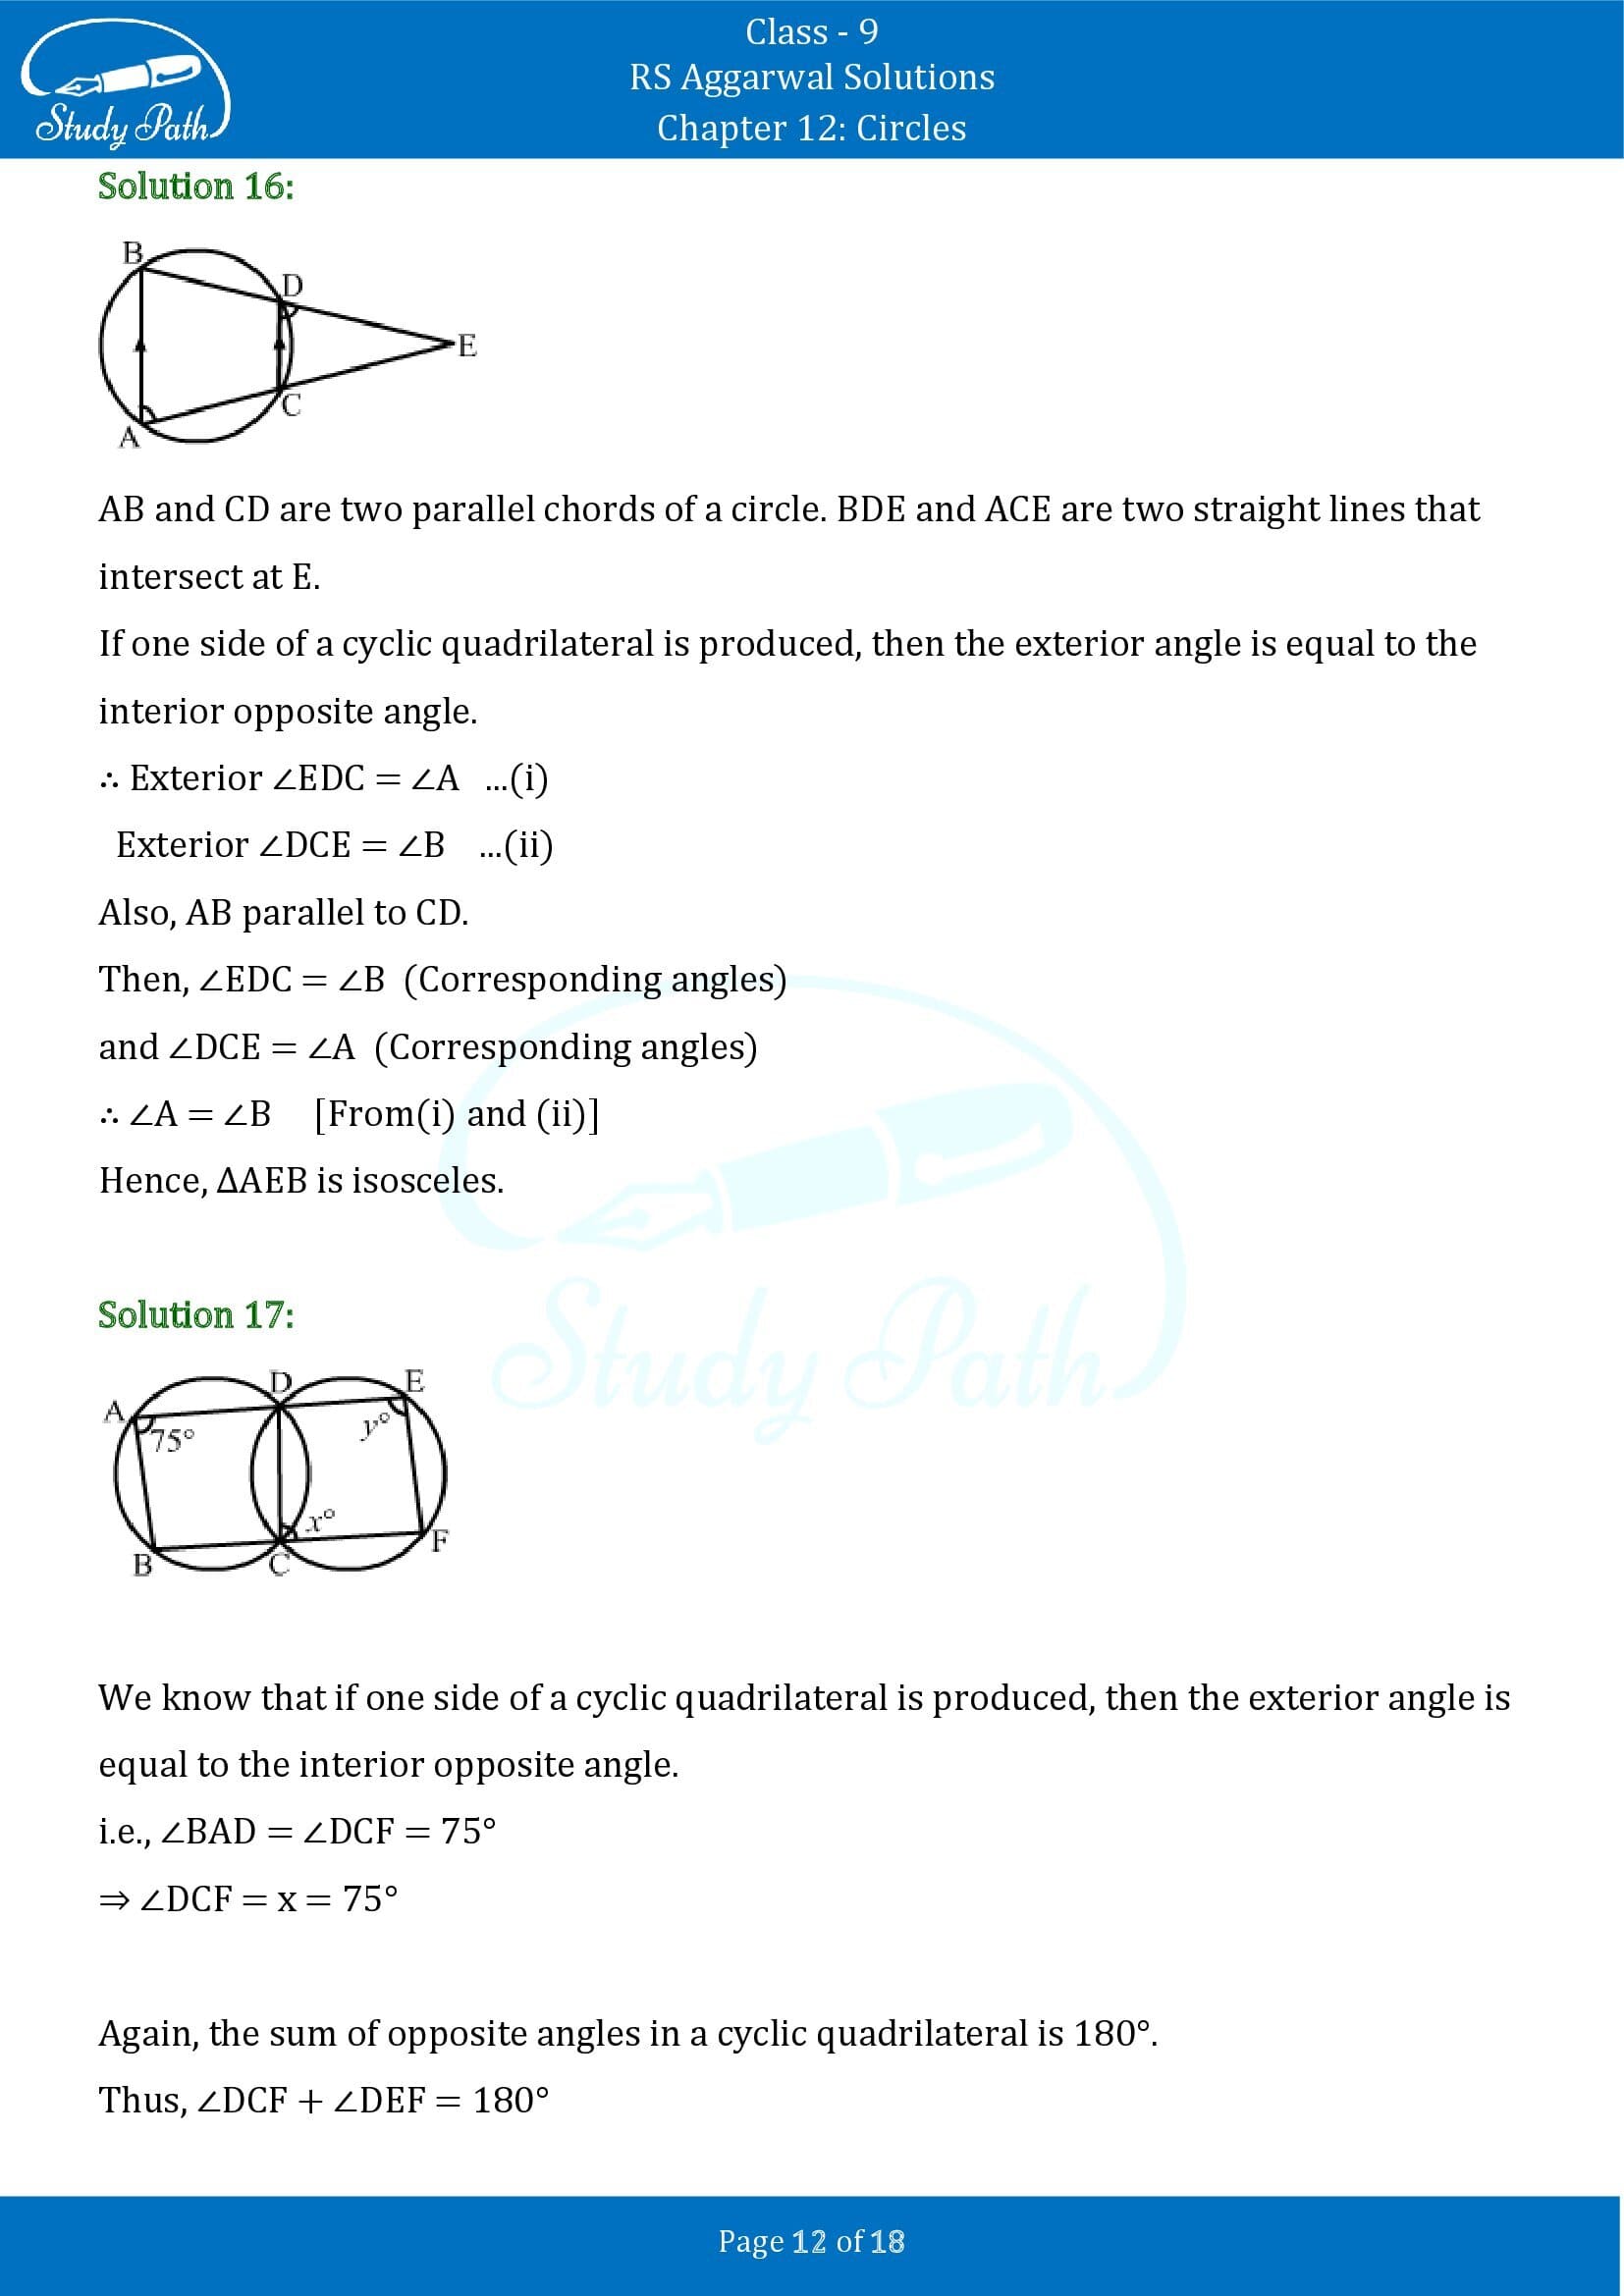 RS Aggarwal Solutions Class 9 Chapter 12 Circles Exercise 12C 00012